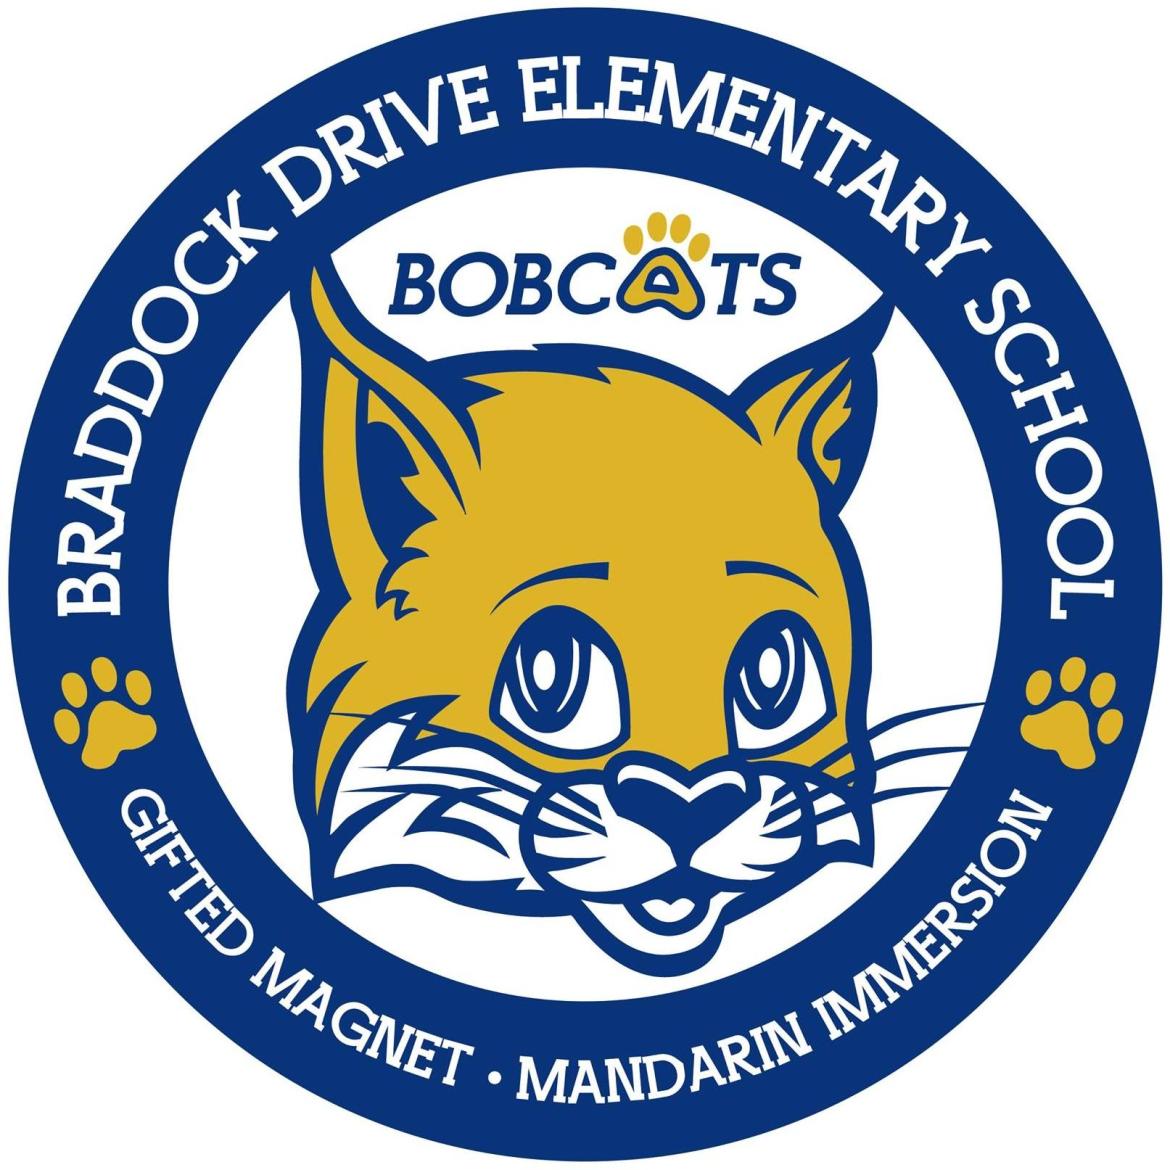 This is a logo of Braddock Elementary School.